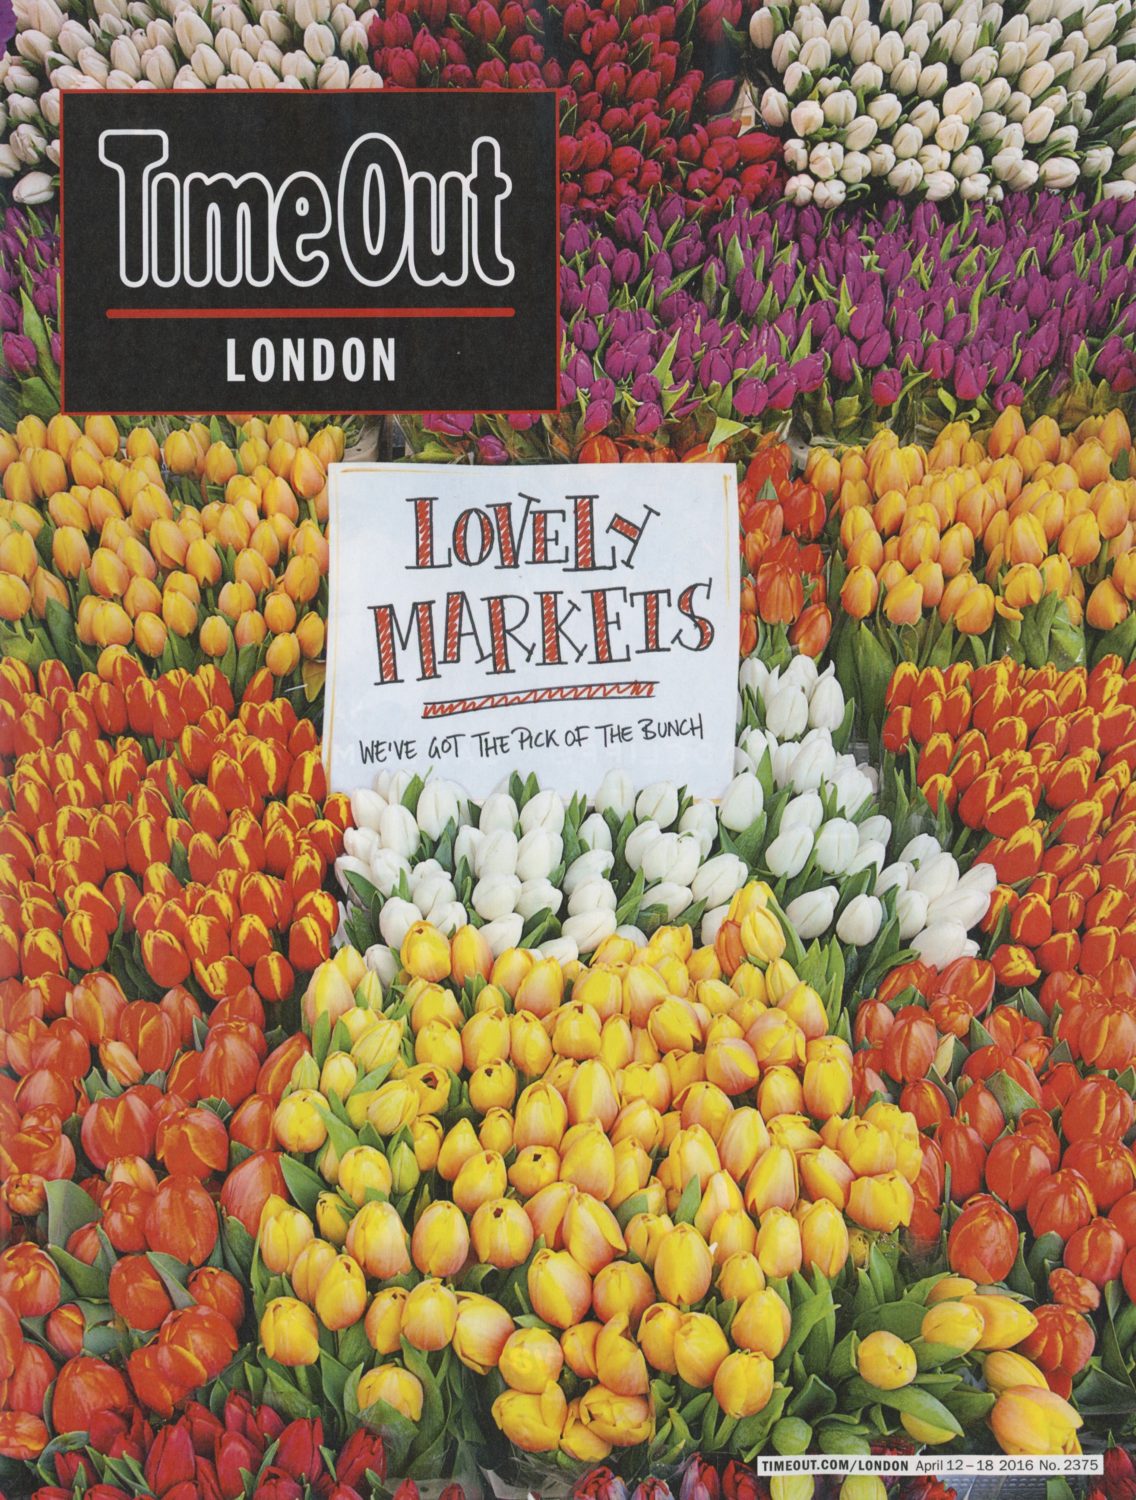 Time Out London, 12th – 18th April, 2016